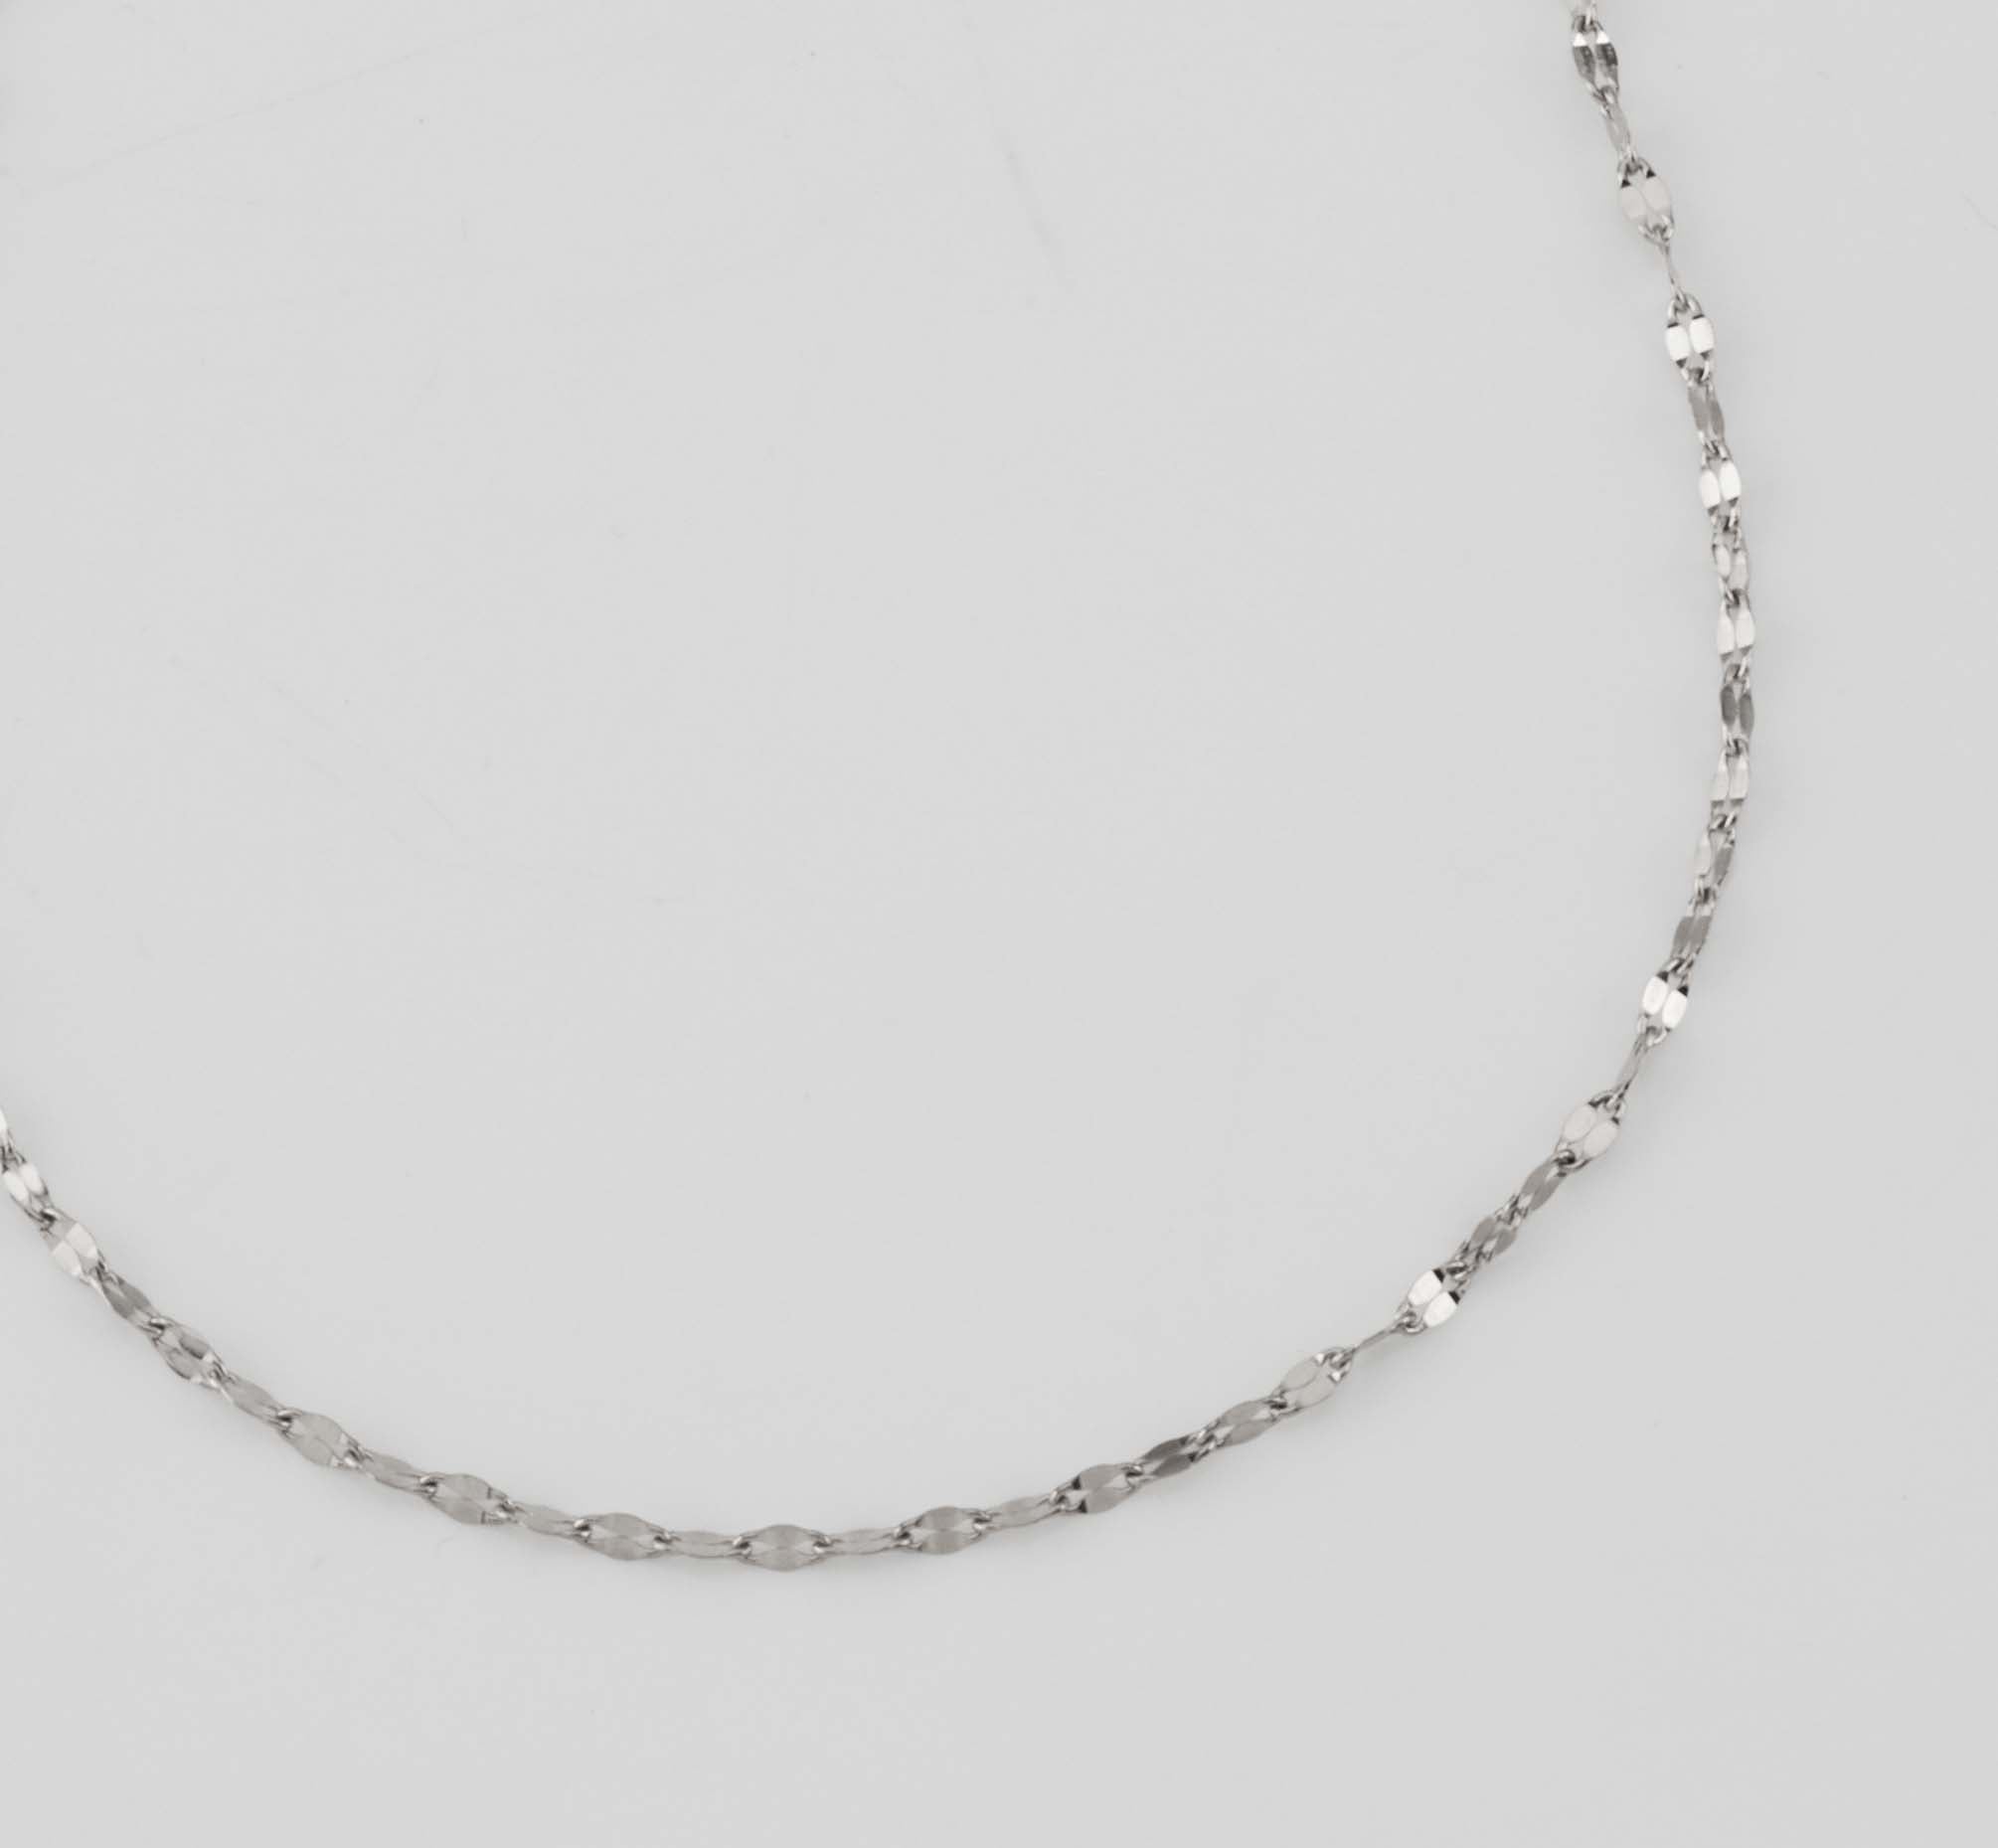 Chanel - Silver Necklace - Ocean Wave Jewelry